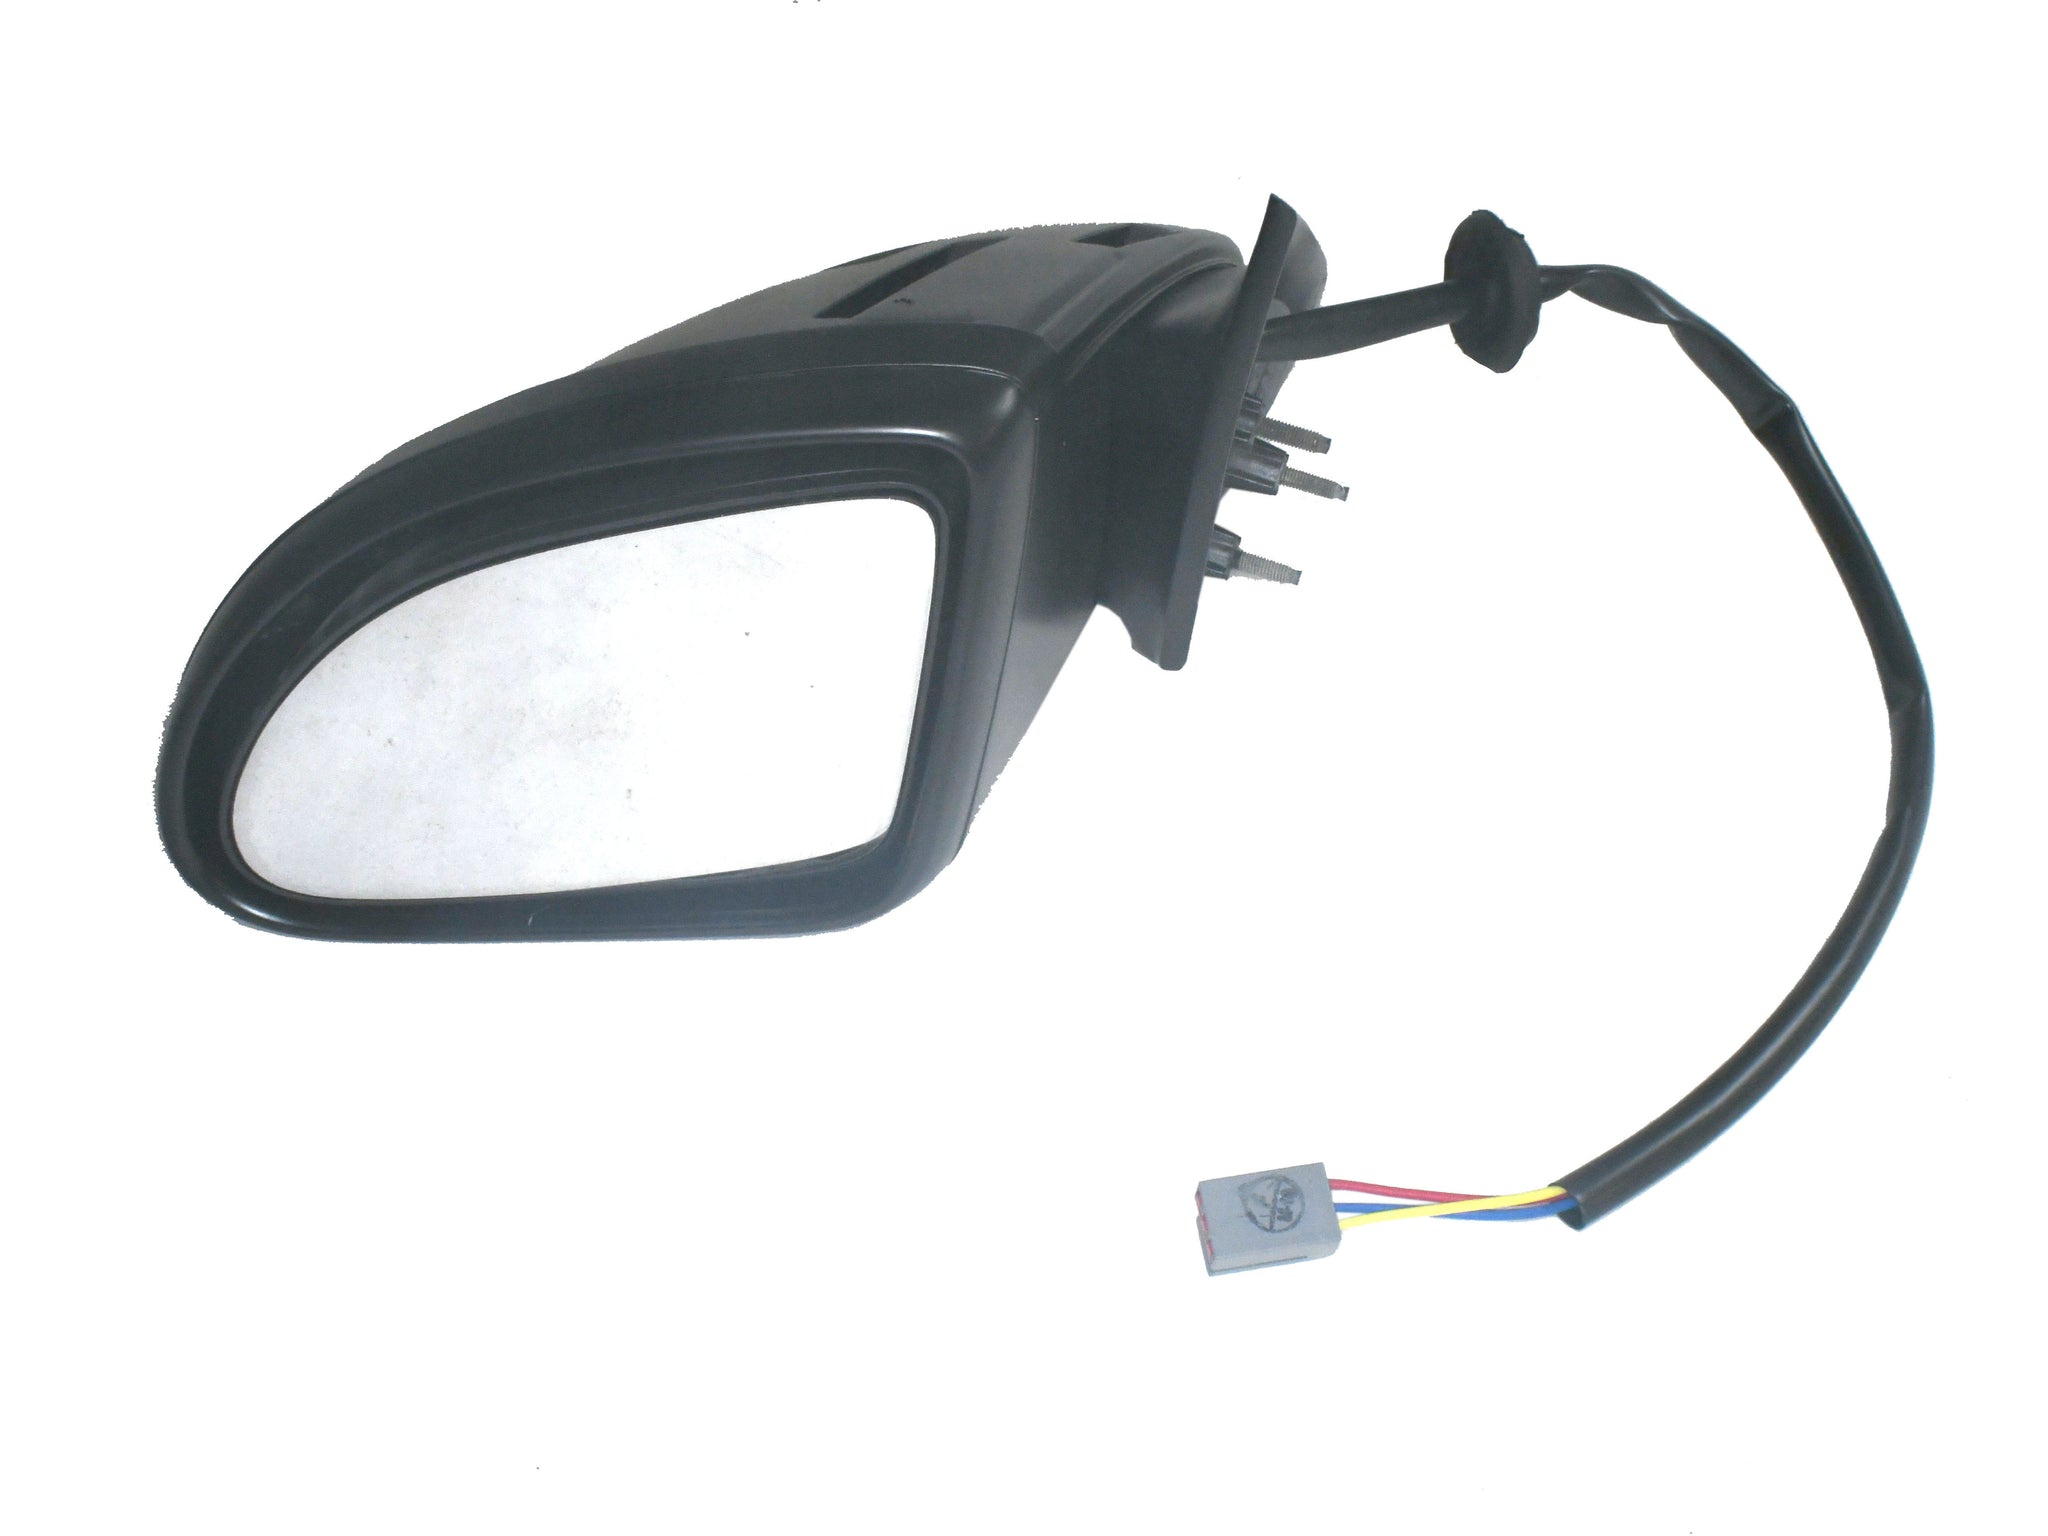 New LH Drivers side mirror for 1986-1991 Taurus Sable E9DZ-17682-D